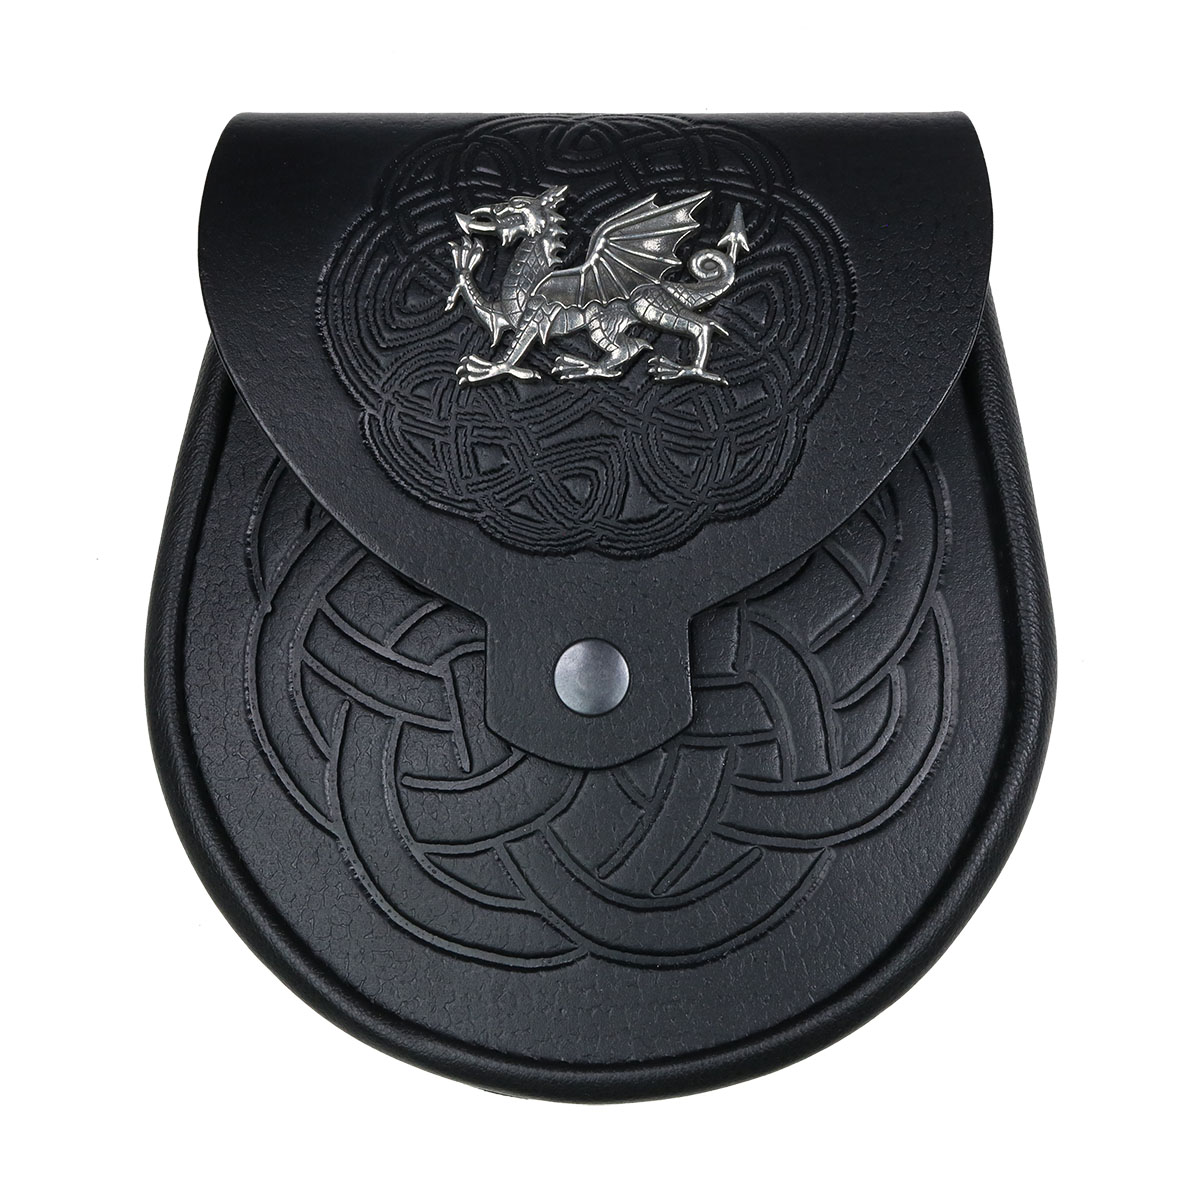 A Welsh Dragon Premium Leather Sporran with a celtic design on it.